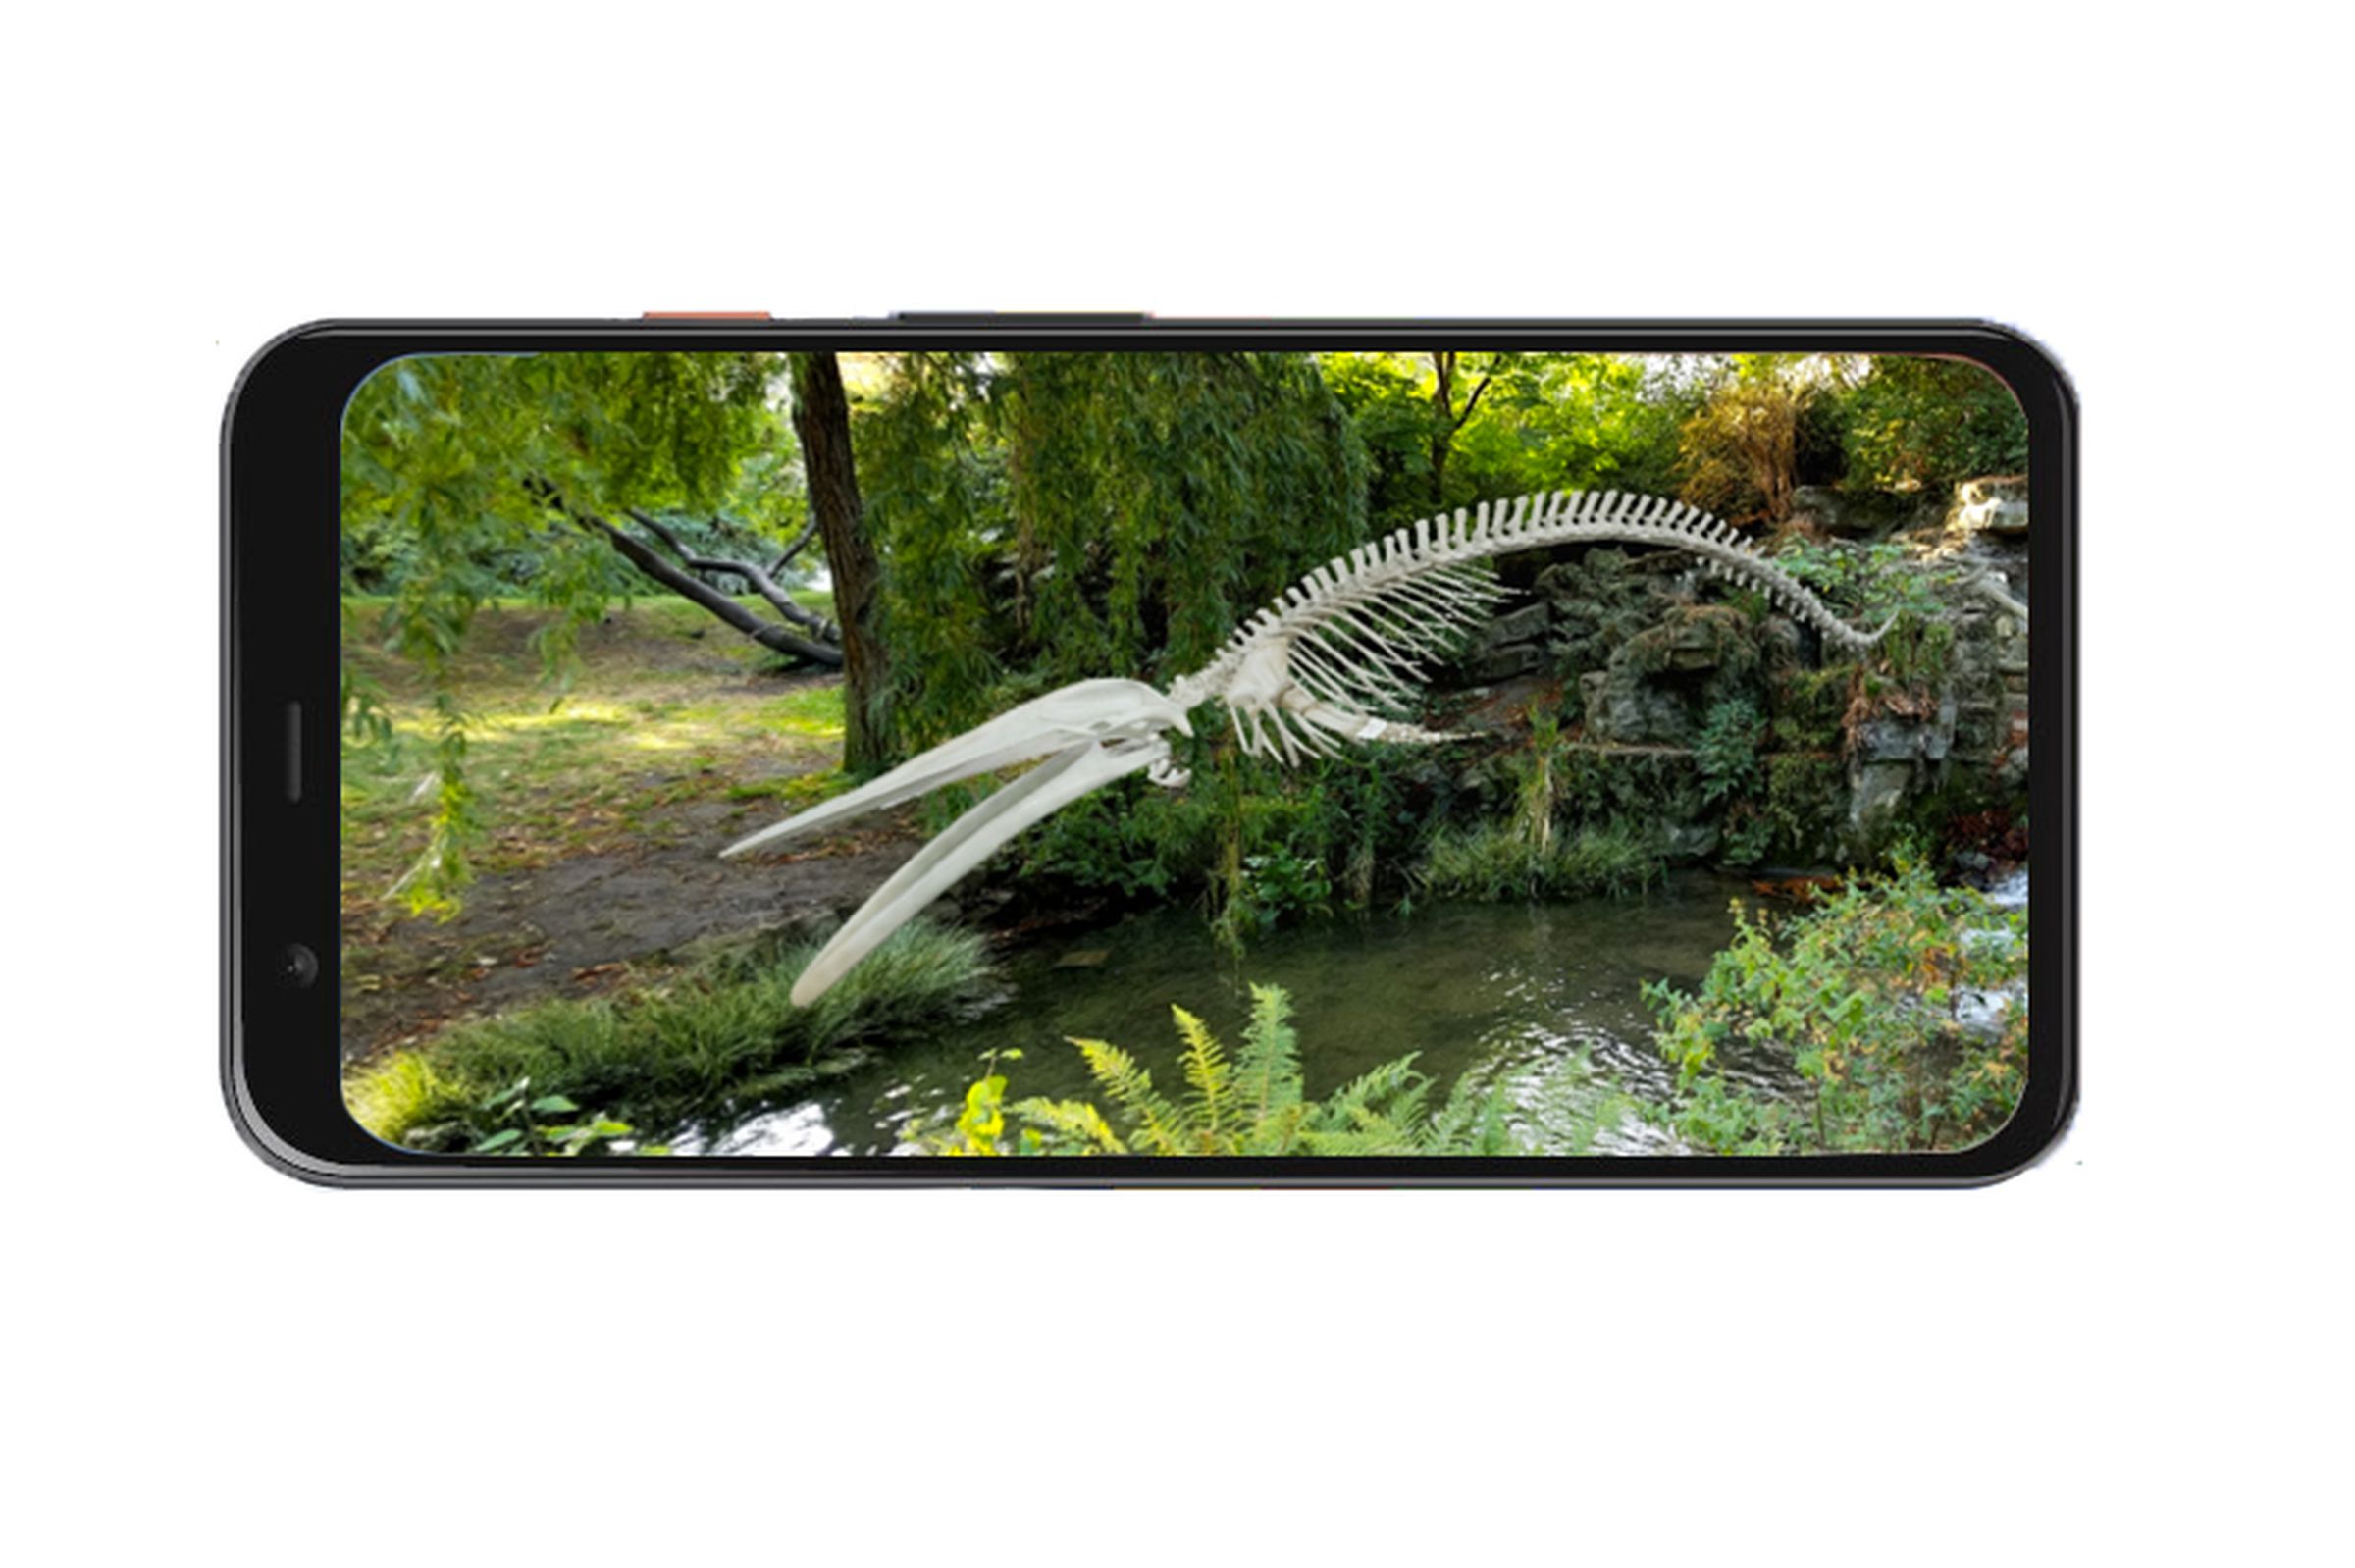 The feature overlays exhibits into your environment, allowing you to view them from any angle and take photos.